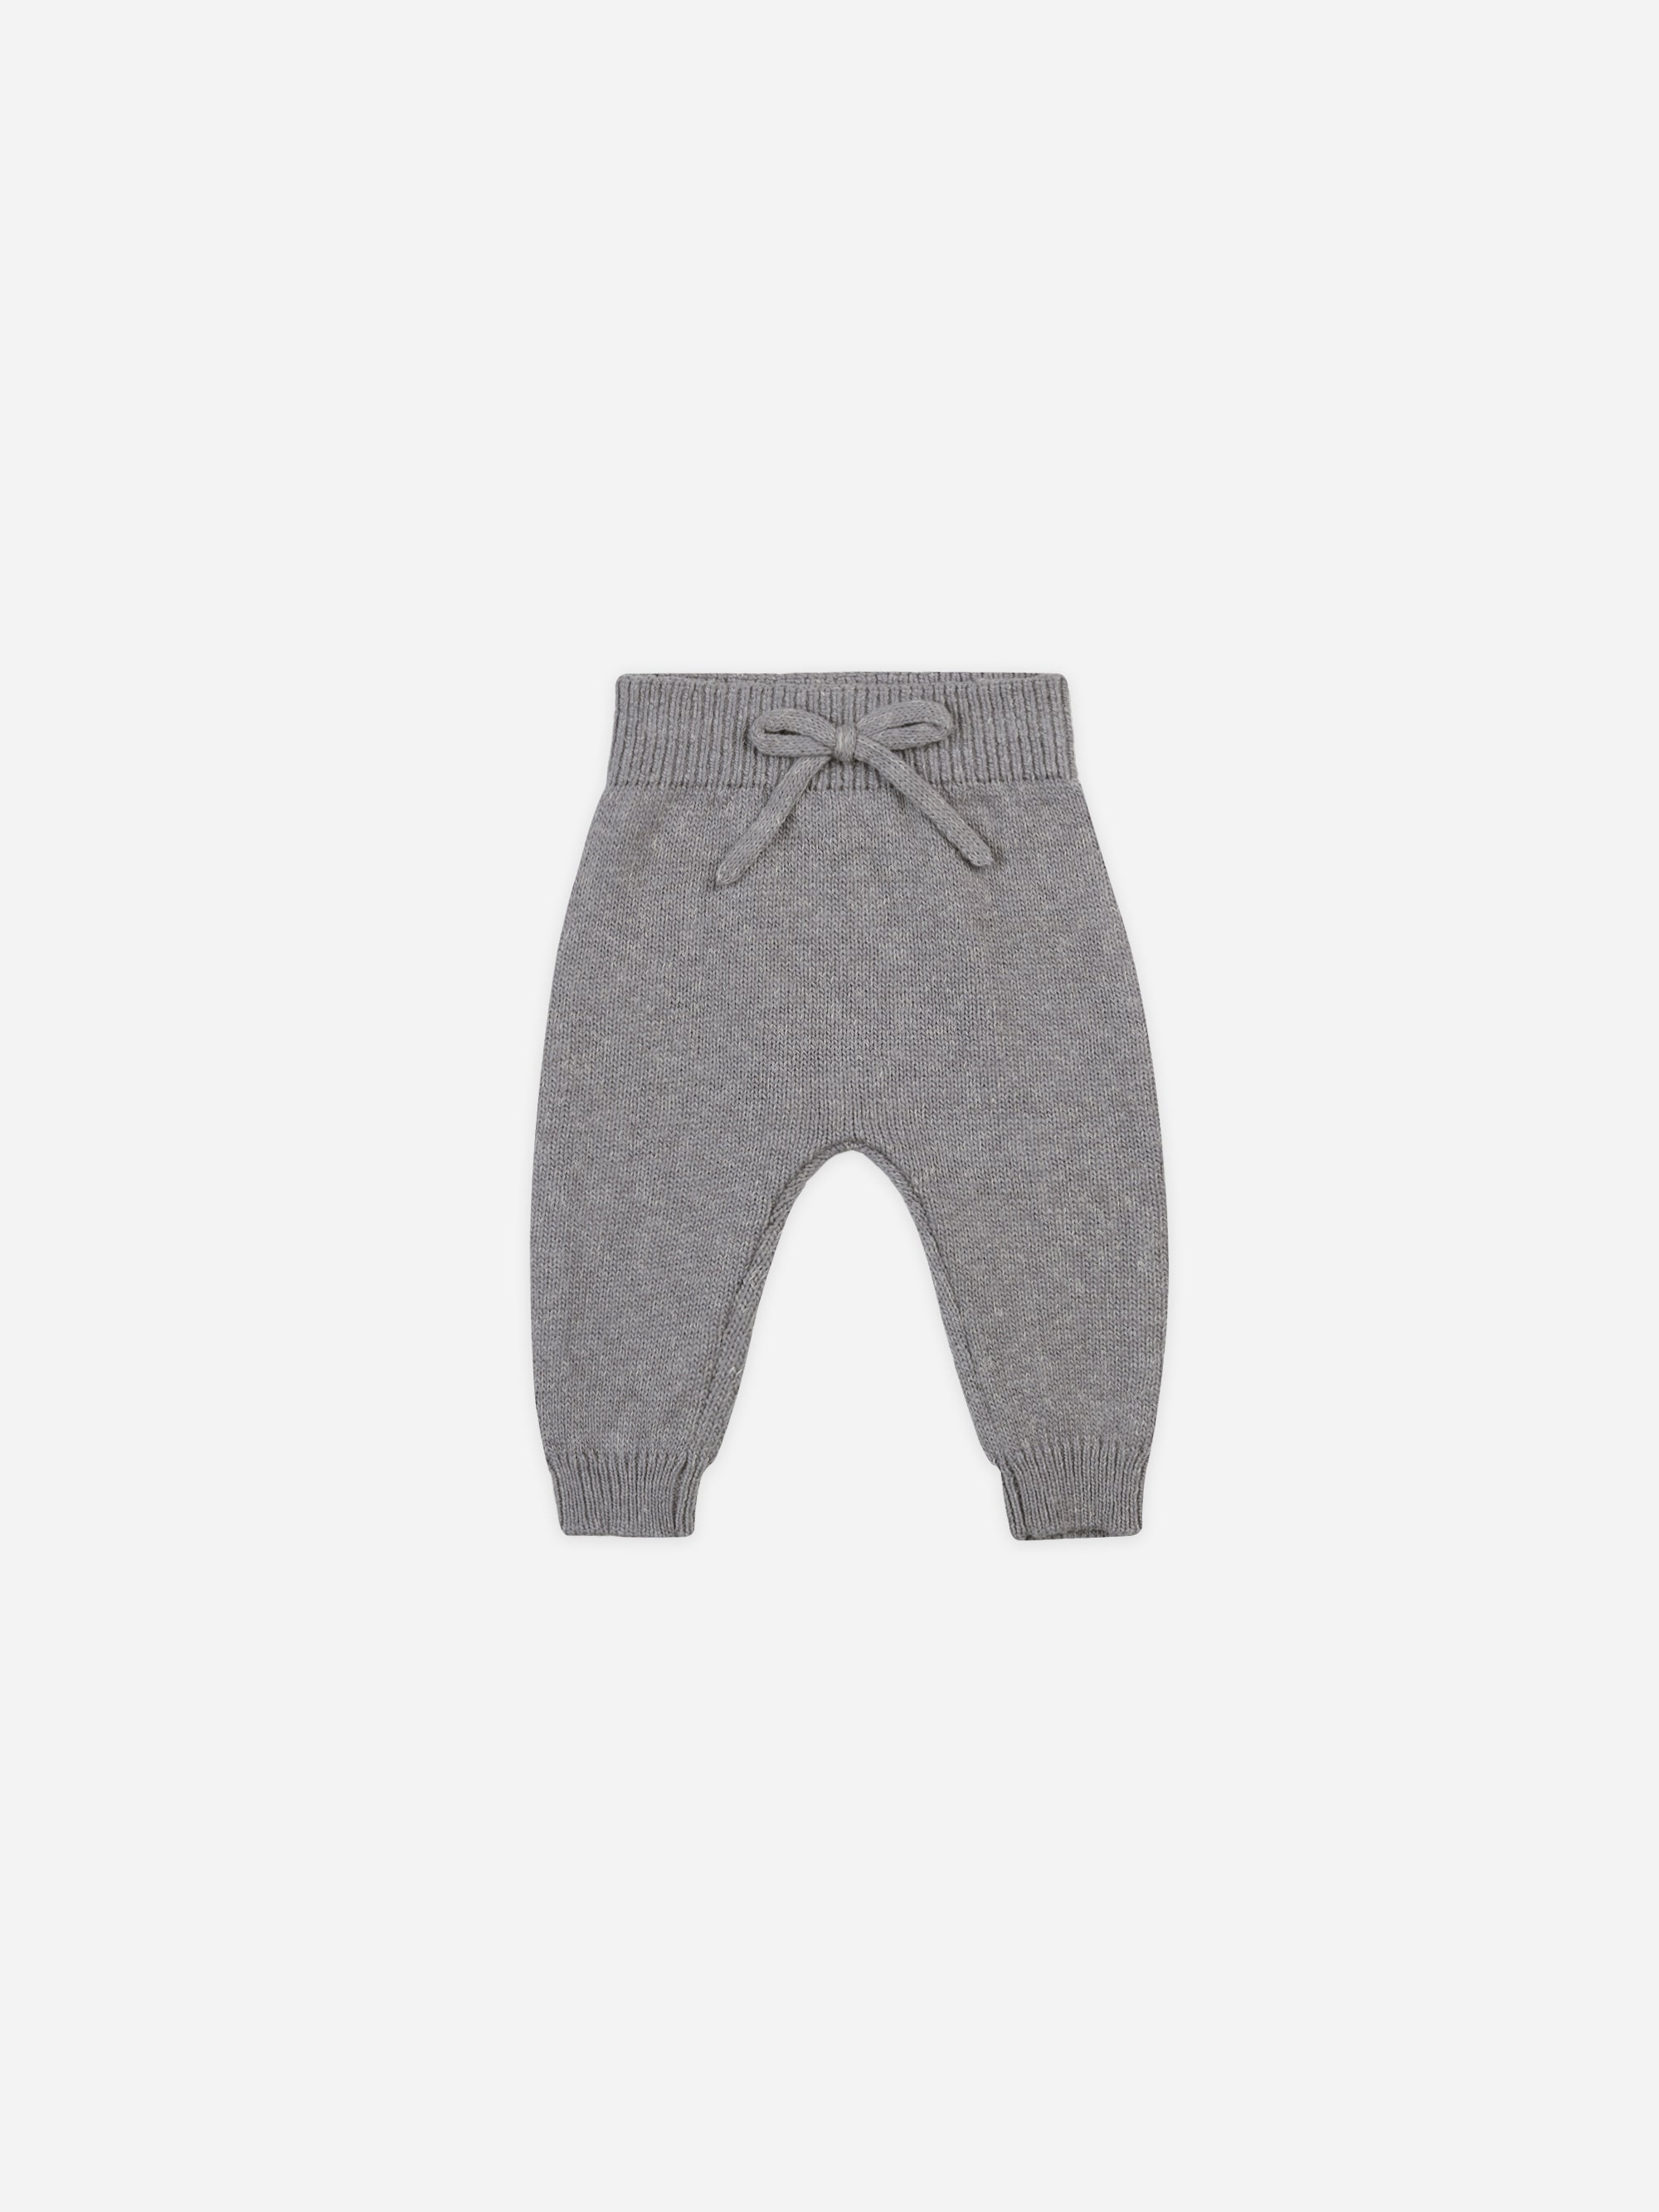 Knit Pant || Heathered Lagoon - Rylee + Cru | Kids Clothes | Trendy Baby Clothes | Modern Infant Outfits |